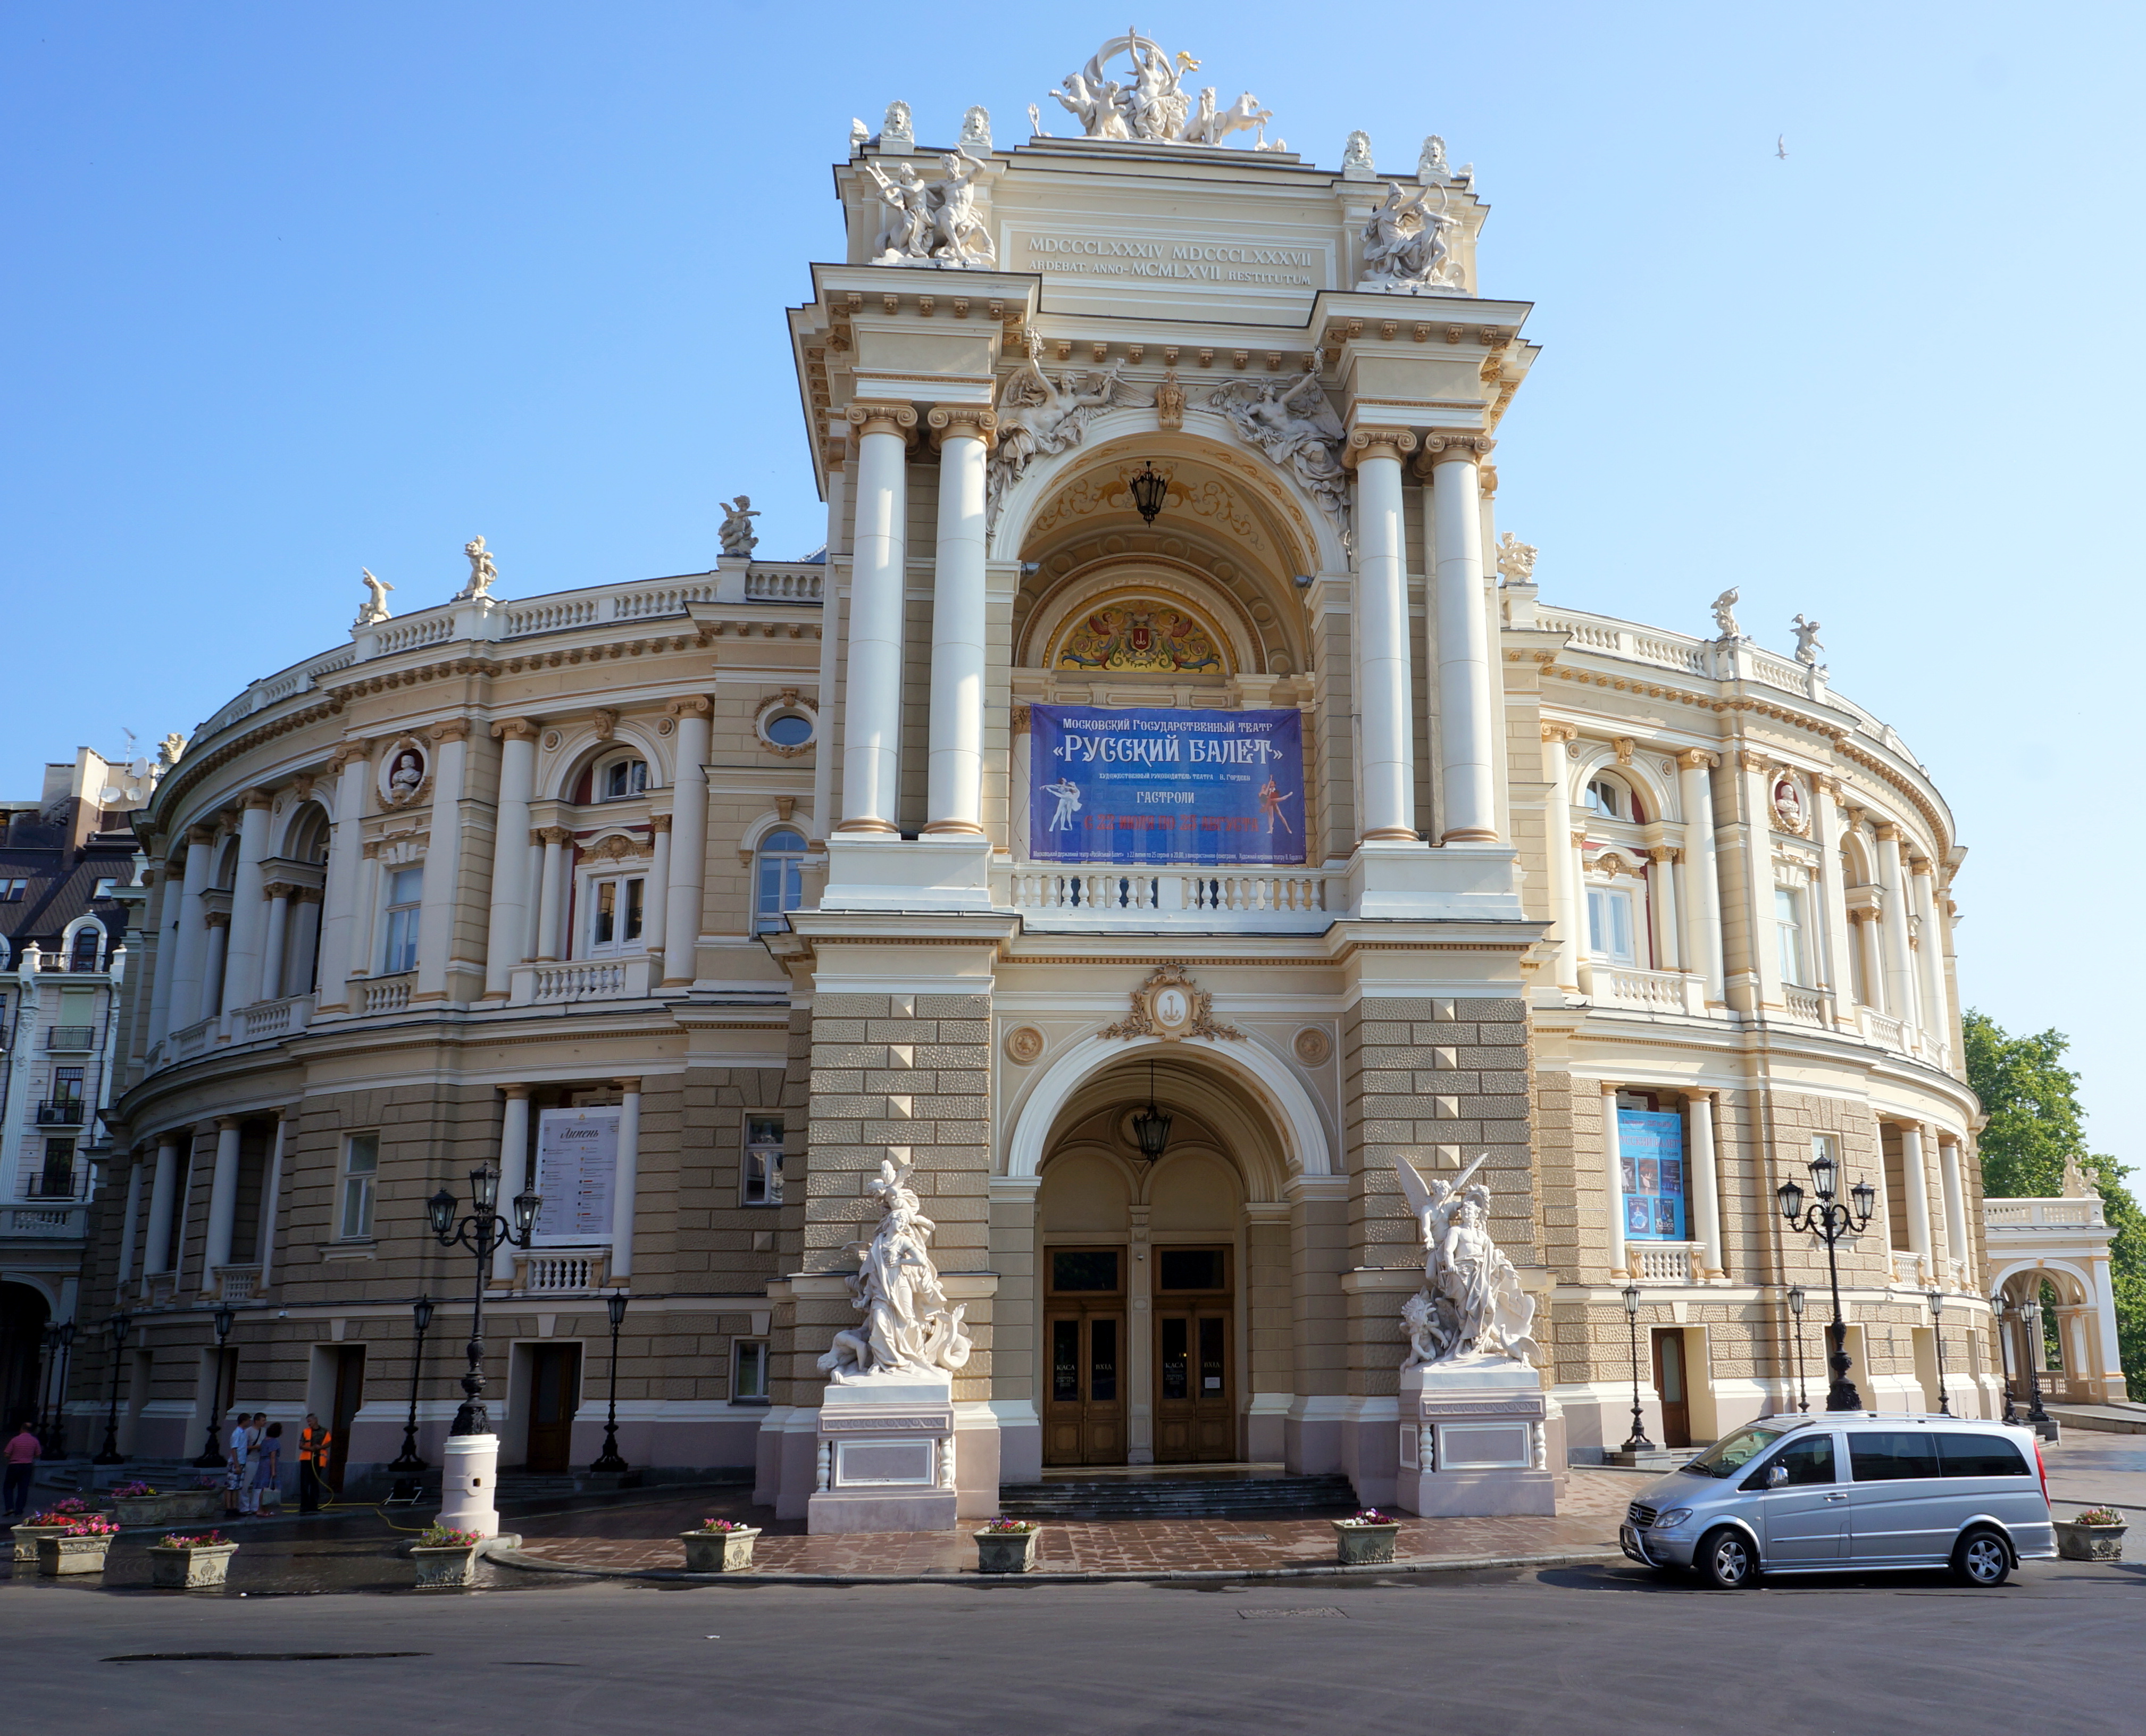 Odessa State Academical Opera and Ballet Theater